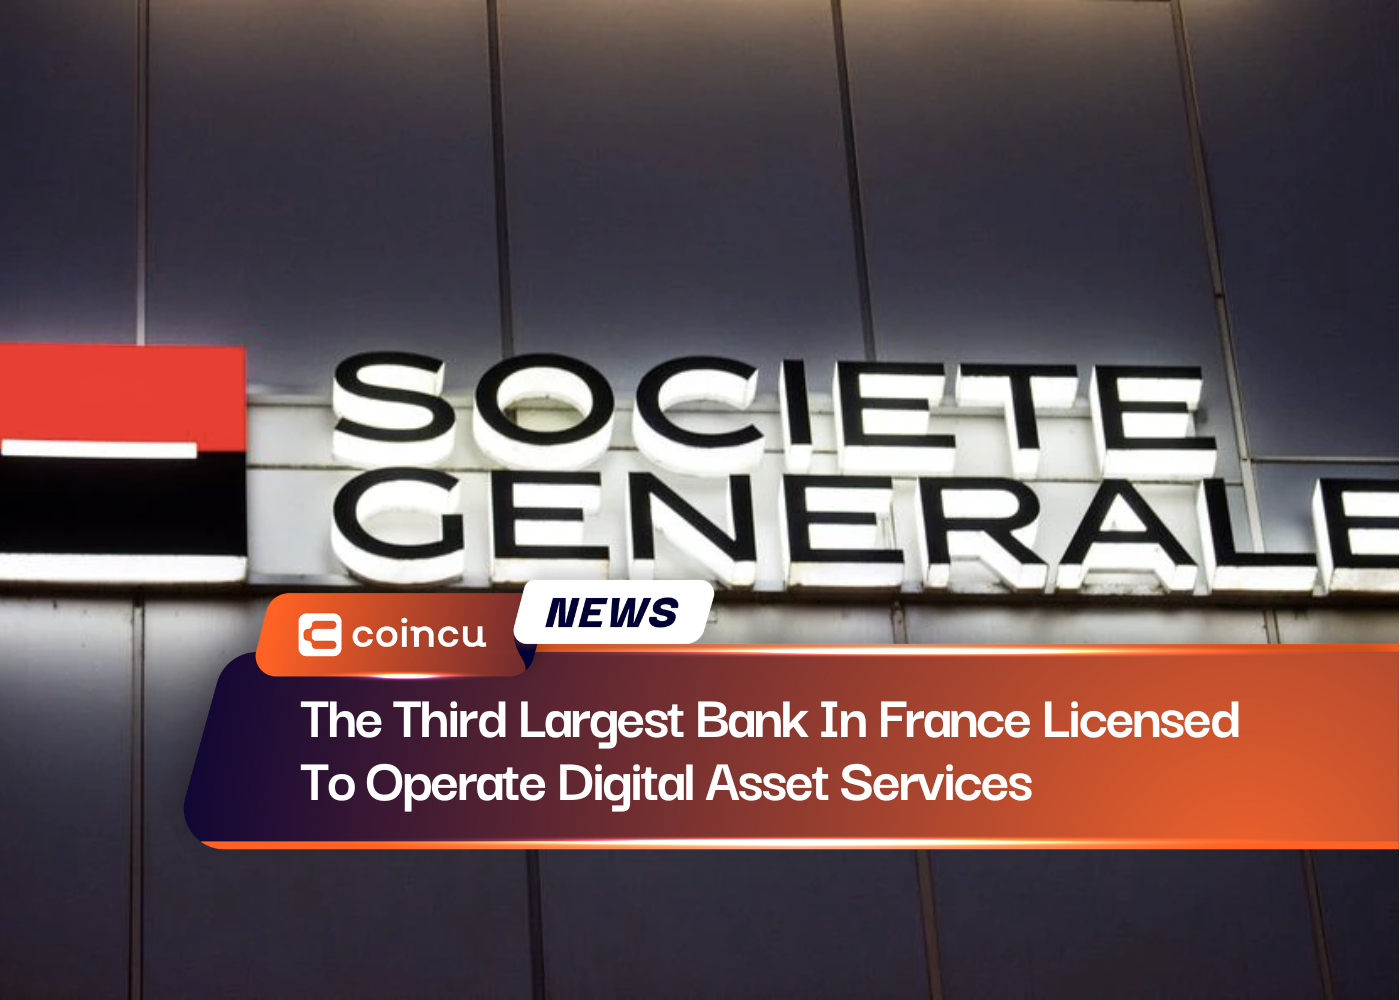 The Third Largest Bank In France Licensed To Operate Digital Asset Services